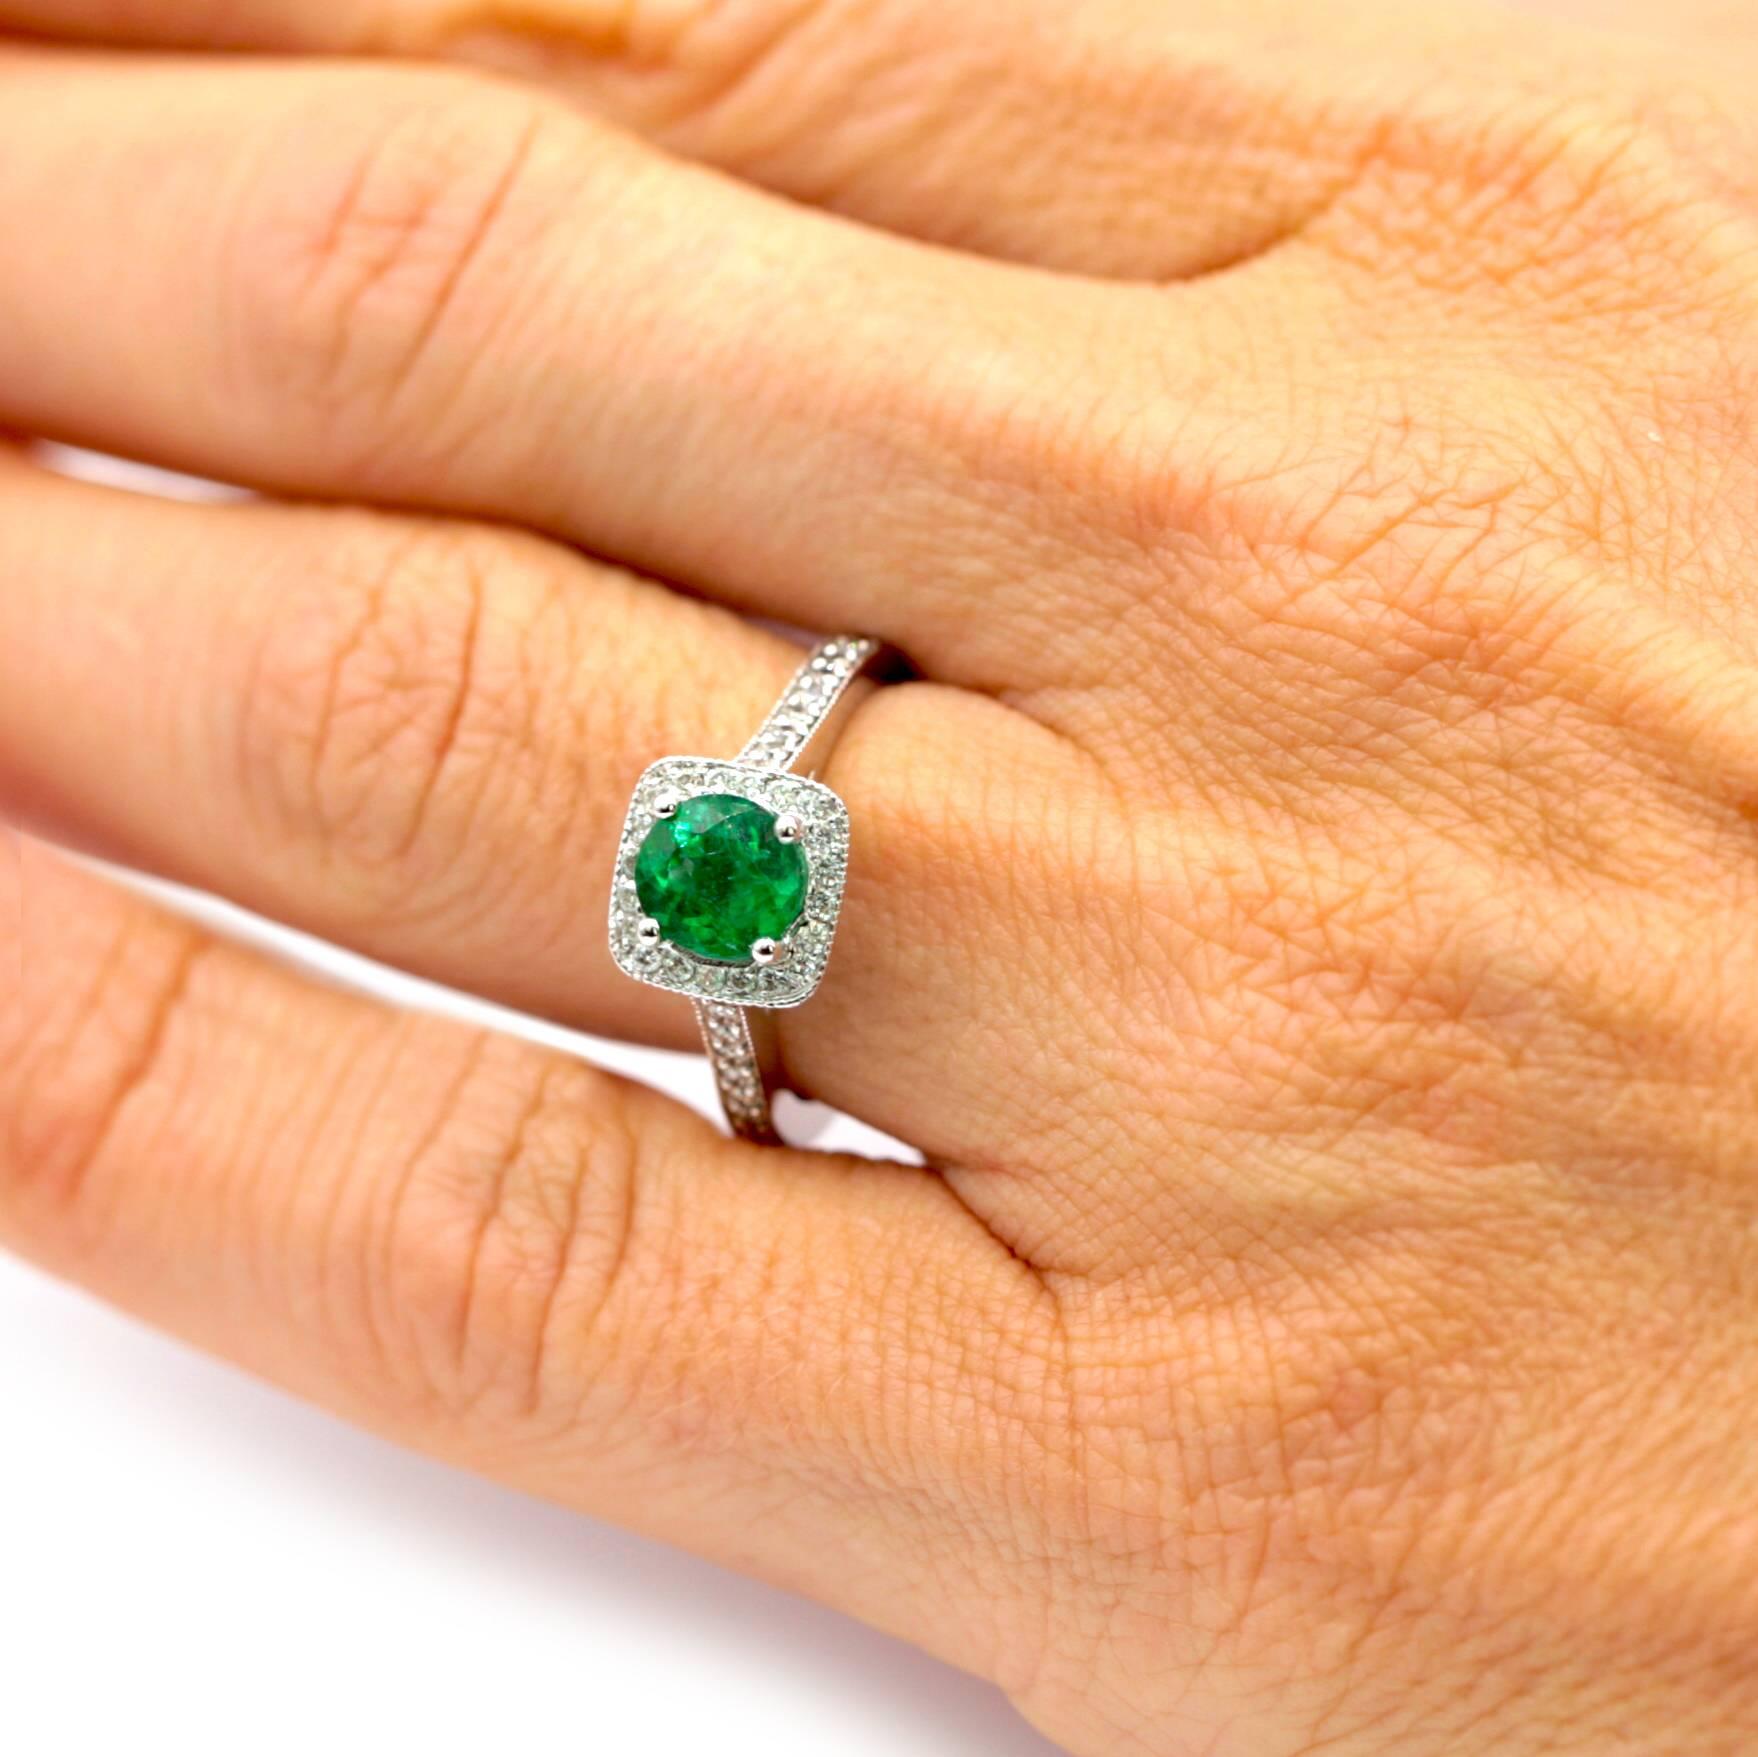 Round Green Emerald weighing 1.25 carats with a certificate from the American Gemological Laboratories stating that it is natural. The emerald is mounted in a fourteen karat white gold halo setting with twenty round diamonds. The shank of the ring